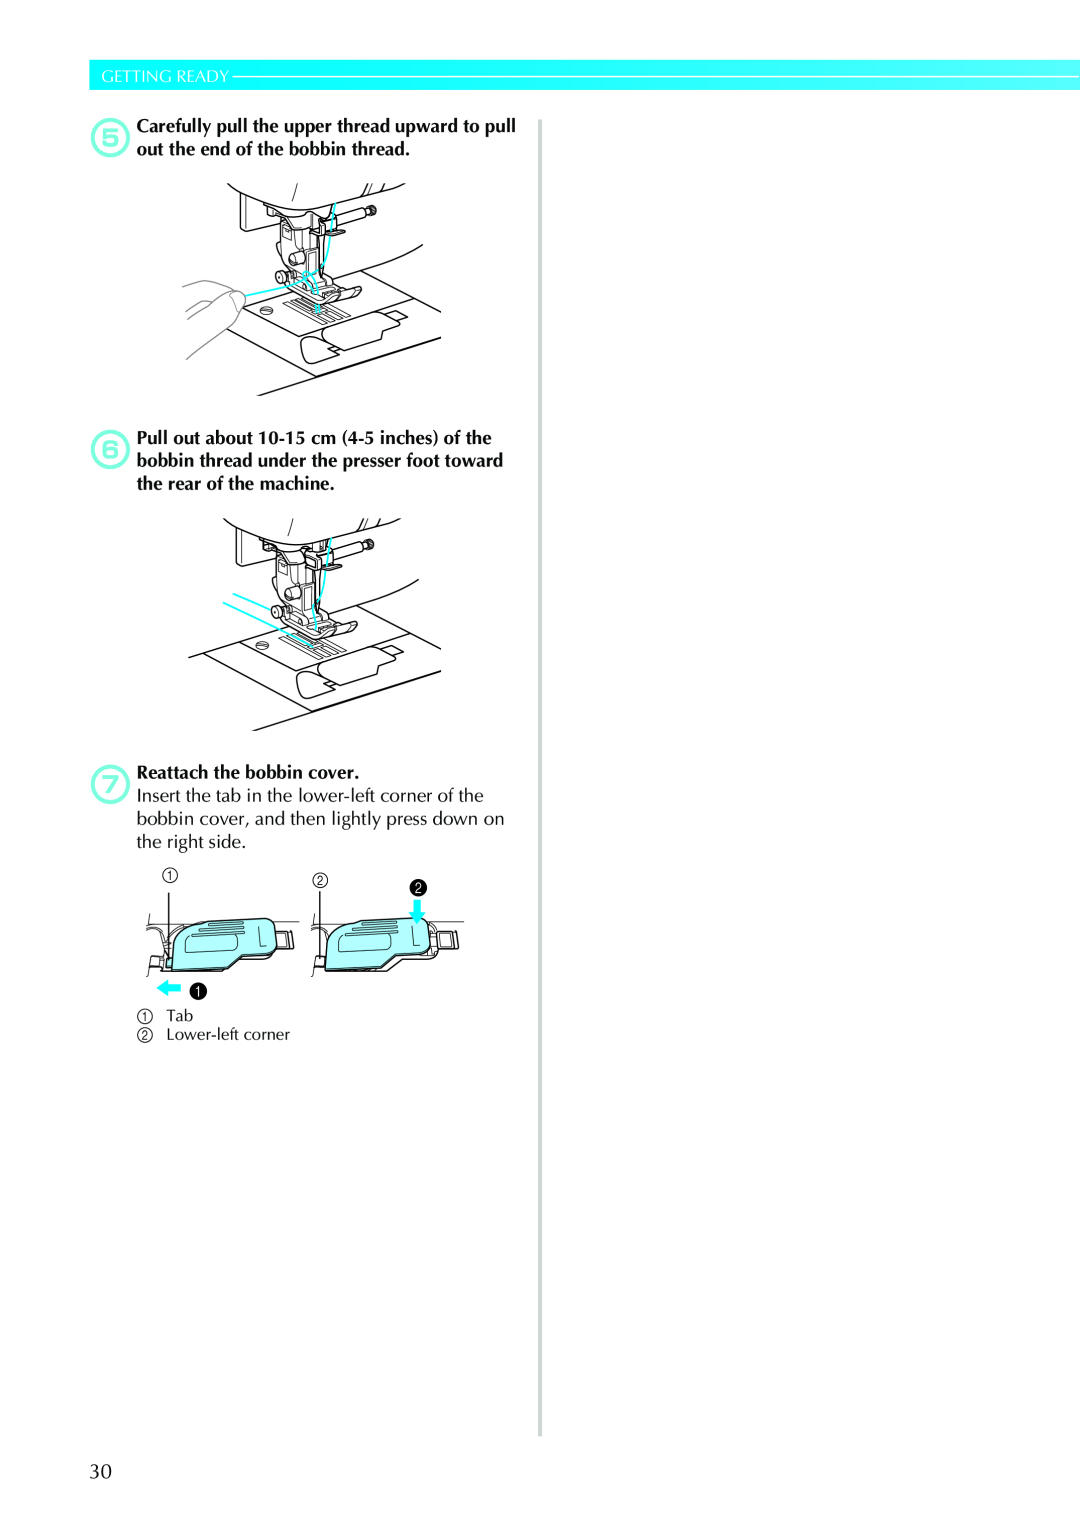 Brother 885-V33, 885-V31 operation manual Getting Ready, gReattach the bobbin cover 